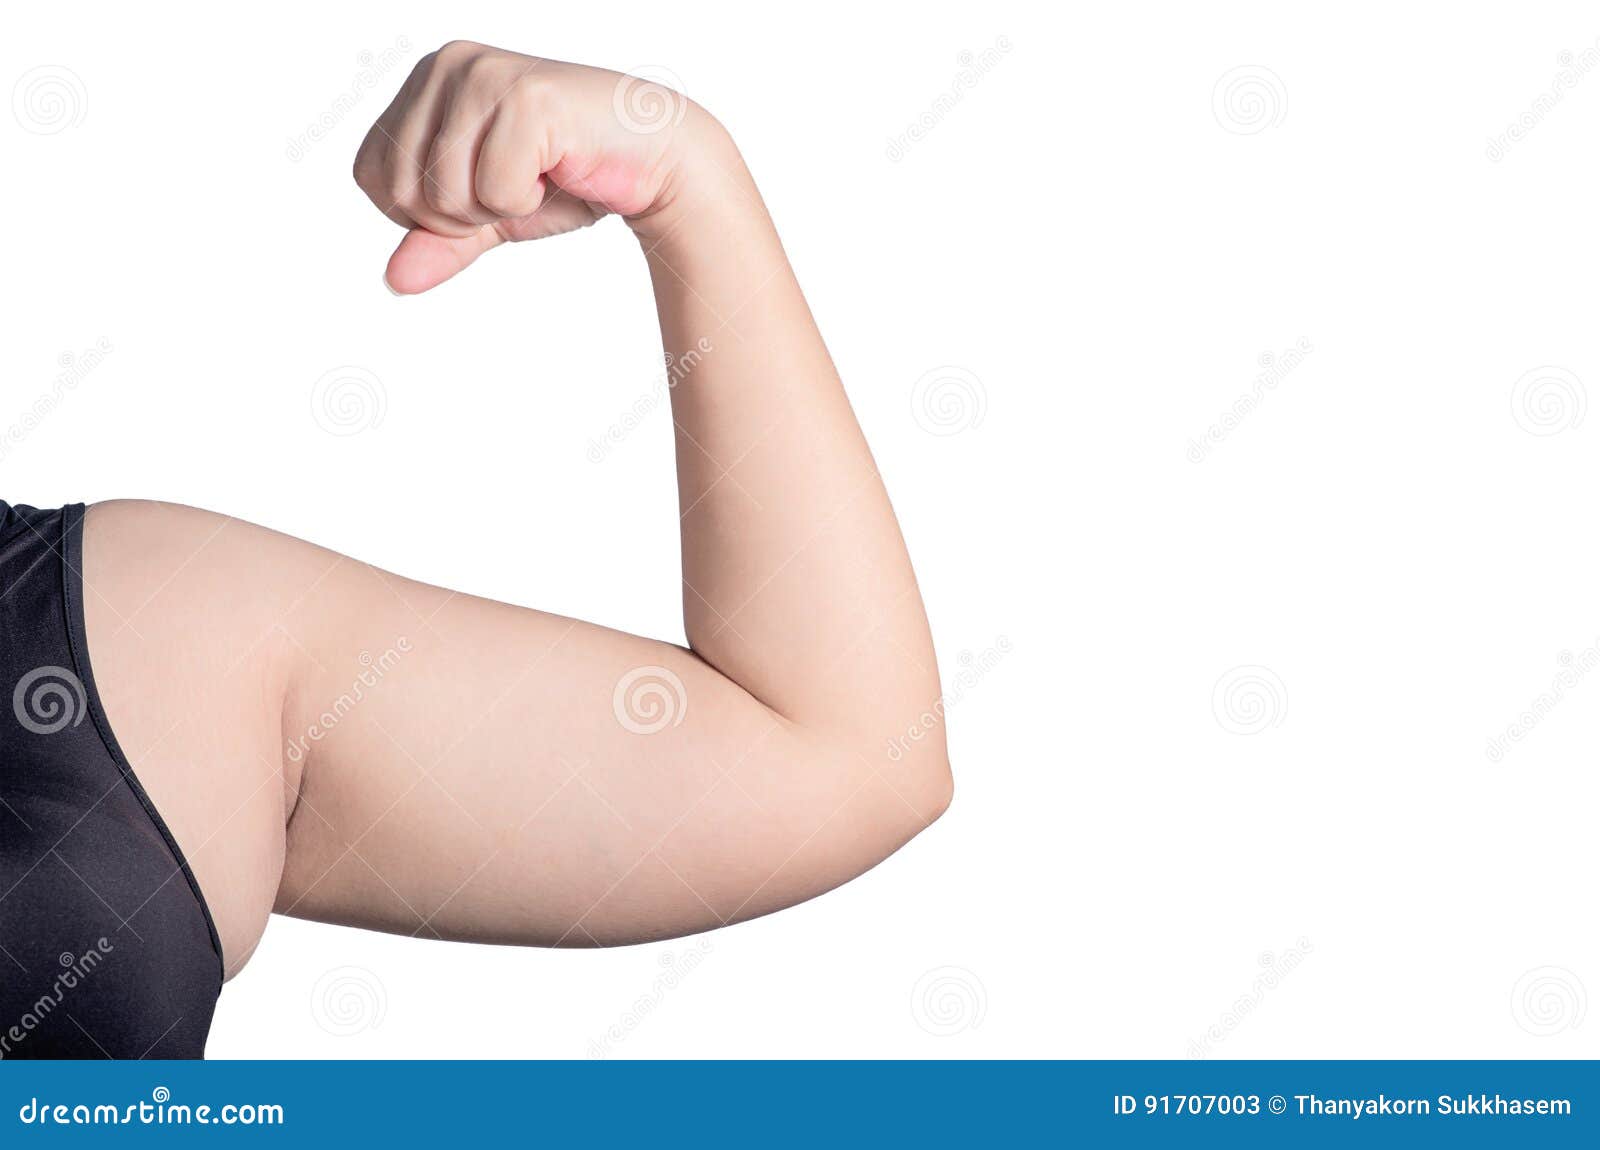 Fat Overweight Woman, Show Big Arms with Fat Accumulation, on